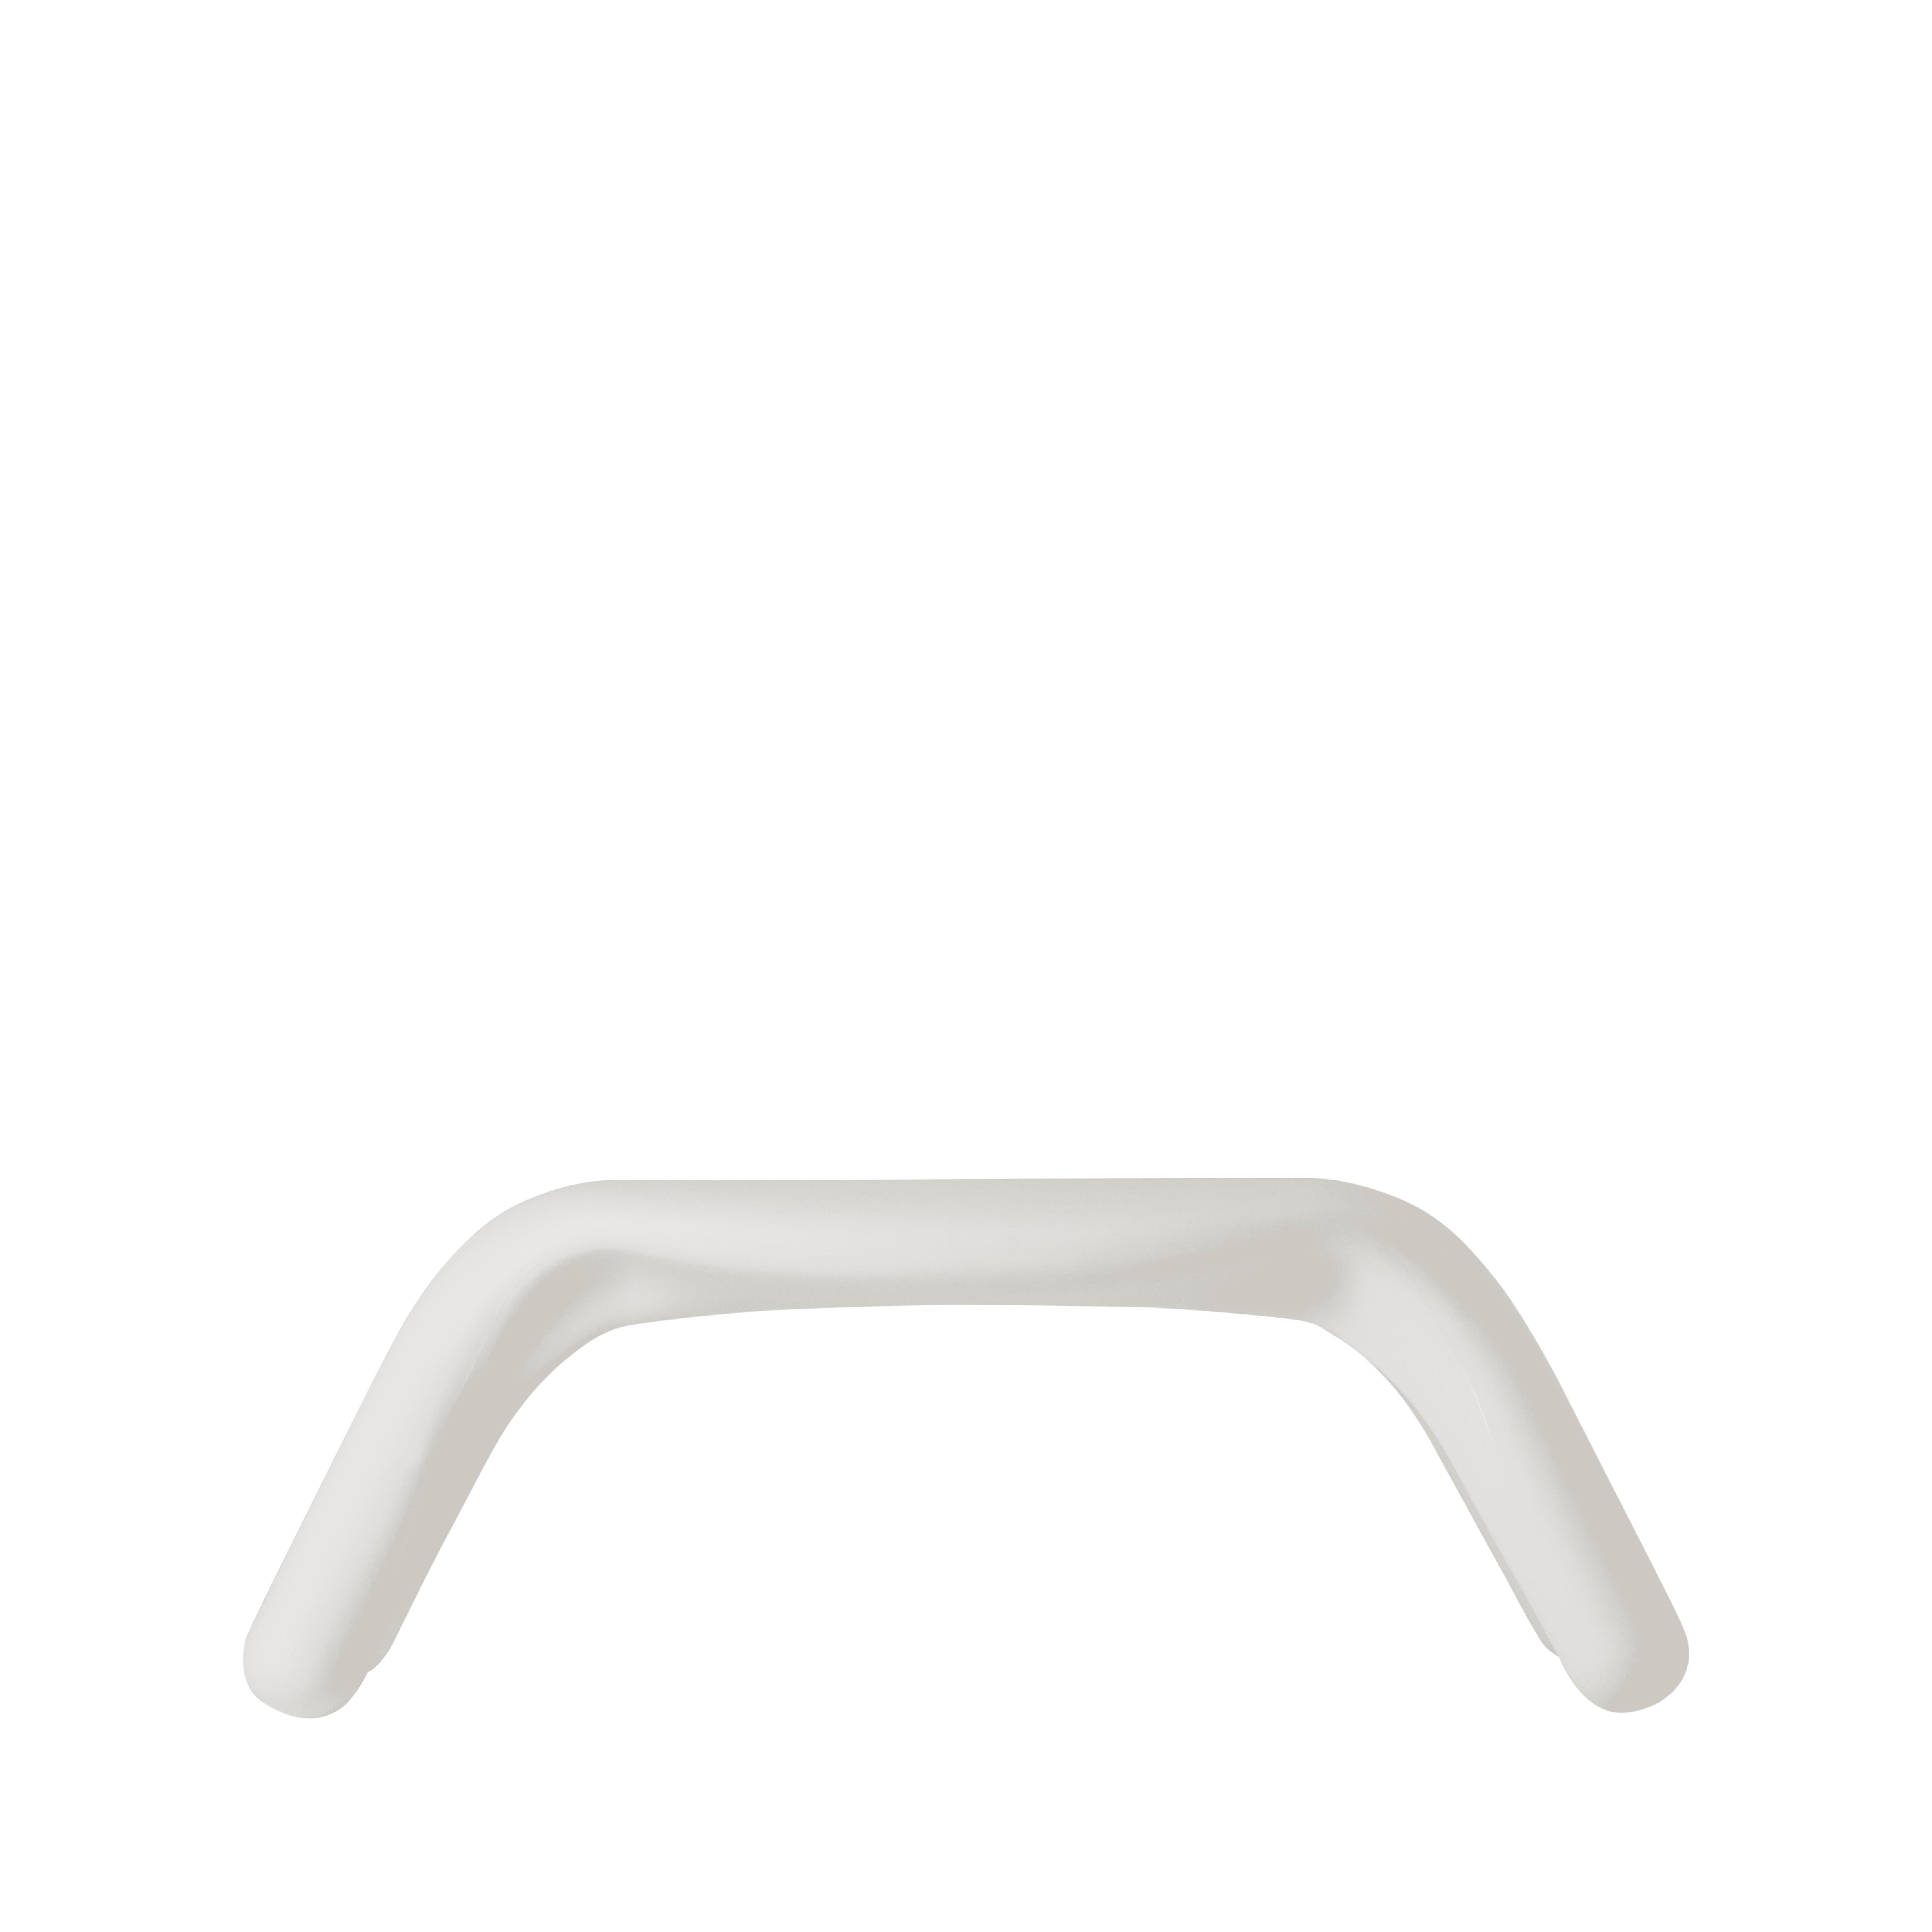 Milky White Atlas Bench by Giorgio Biscaro
Dimensions: D 46 x W 115 x H 42 cm.
Materials: Polyethylene.
Weight: 8 kg.

Available in different color options. This product is suitable for indoor and outdoor use. This product is stackable. Please